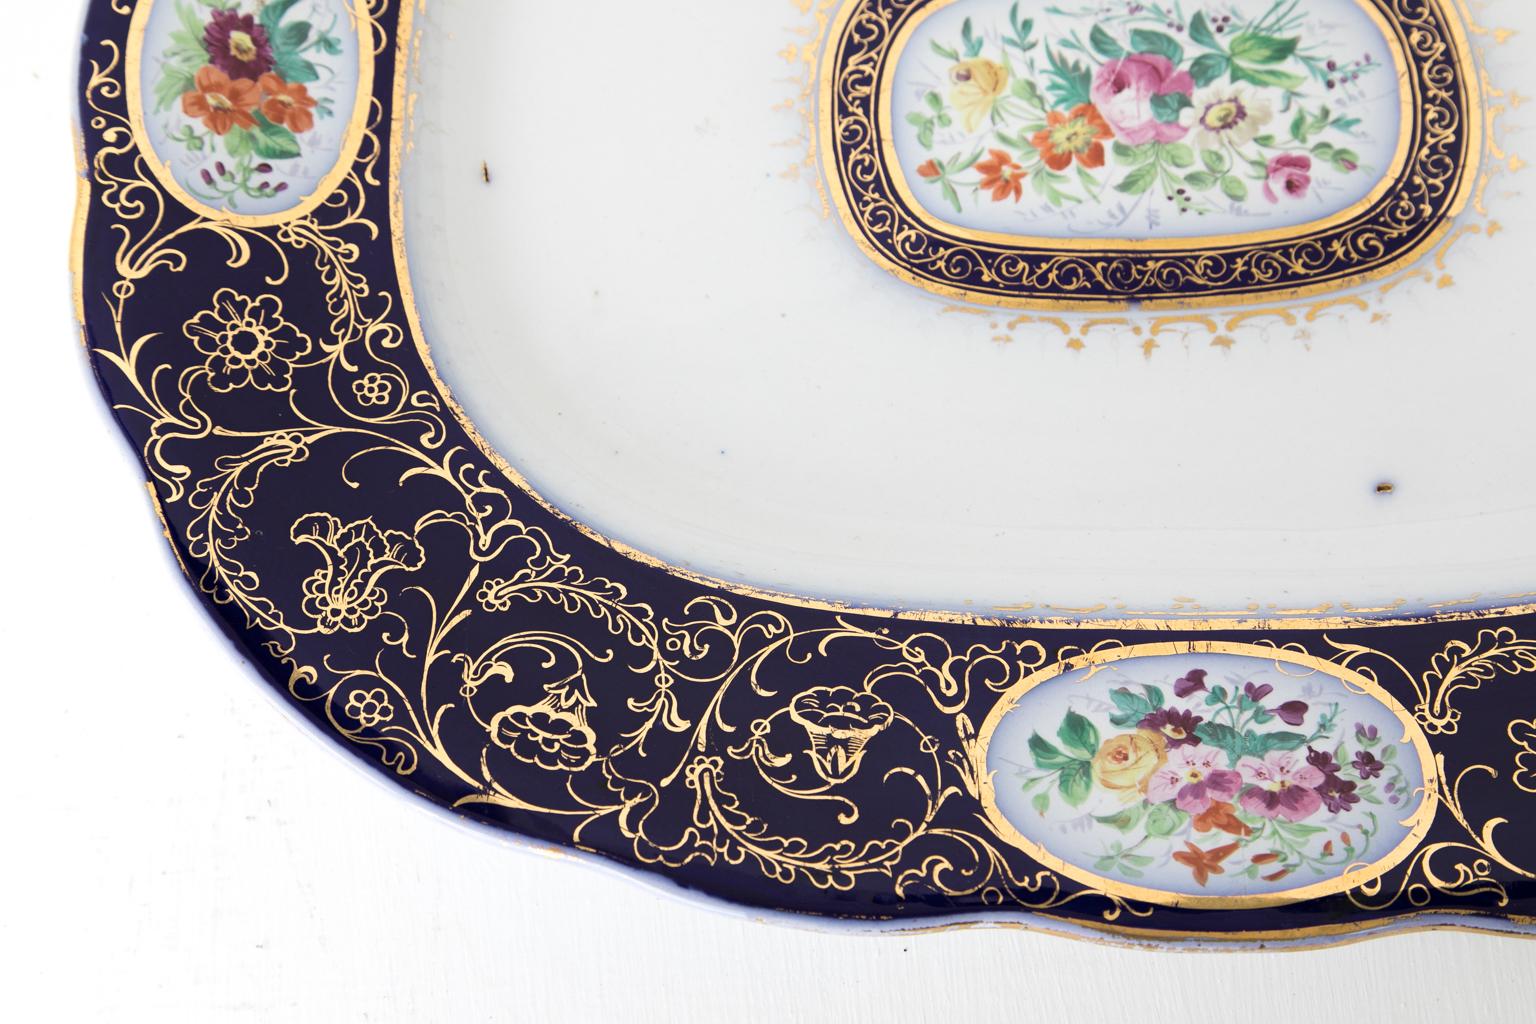 English ironstone serving platter, with a deep cobalt border with four oval floral vignettes. The center panel has floral motifs surrounded by cobalt and gilt.
   